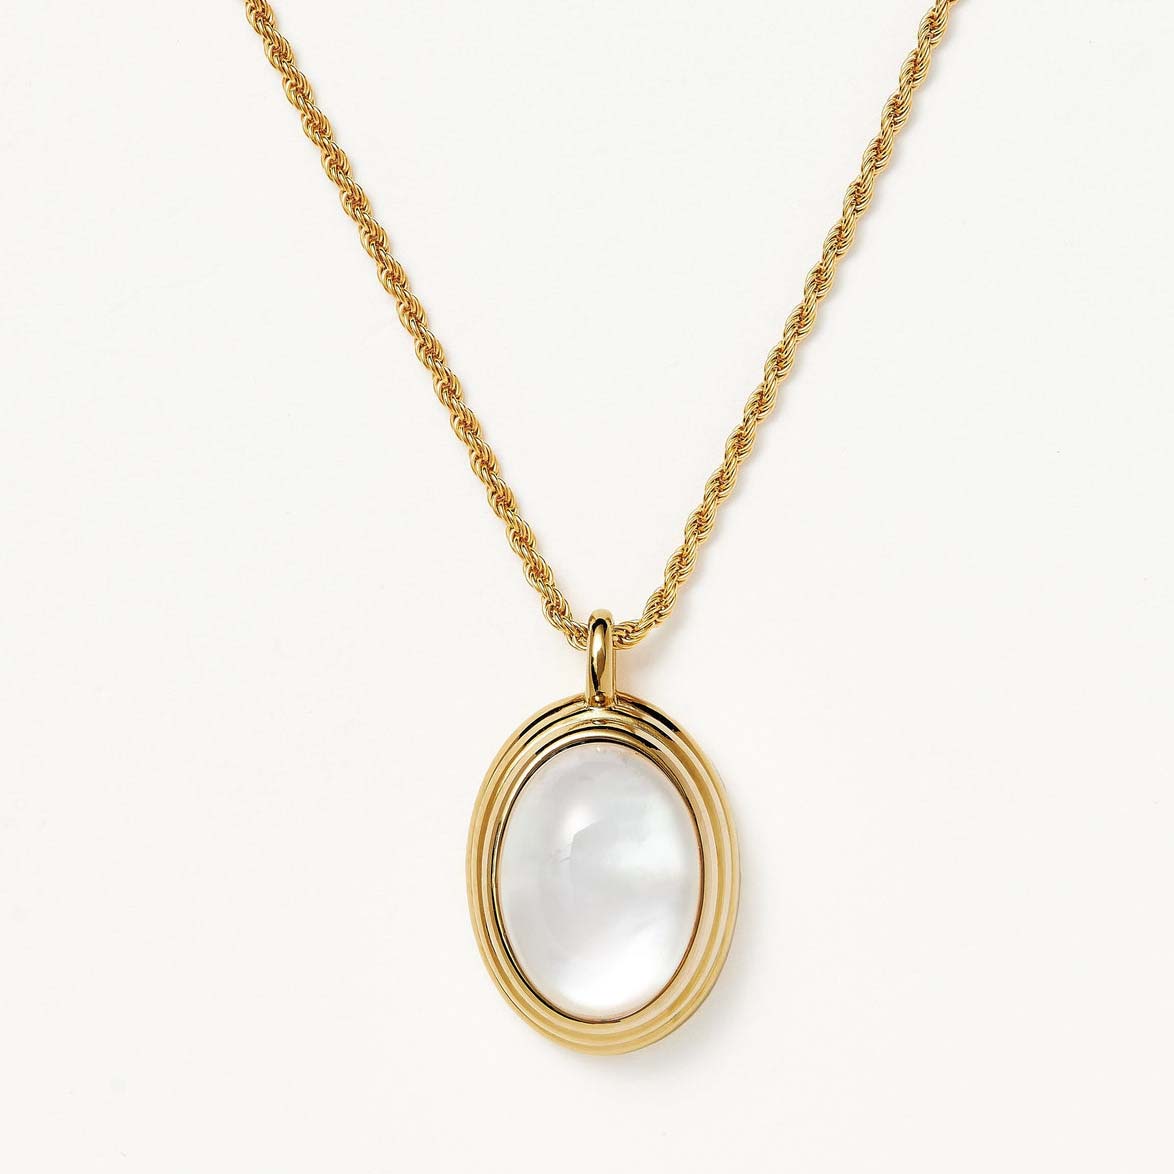 Custom wholesale oval CZ pendant necklaces in 18k gold plated vermeil mother of pearl